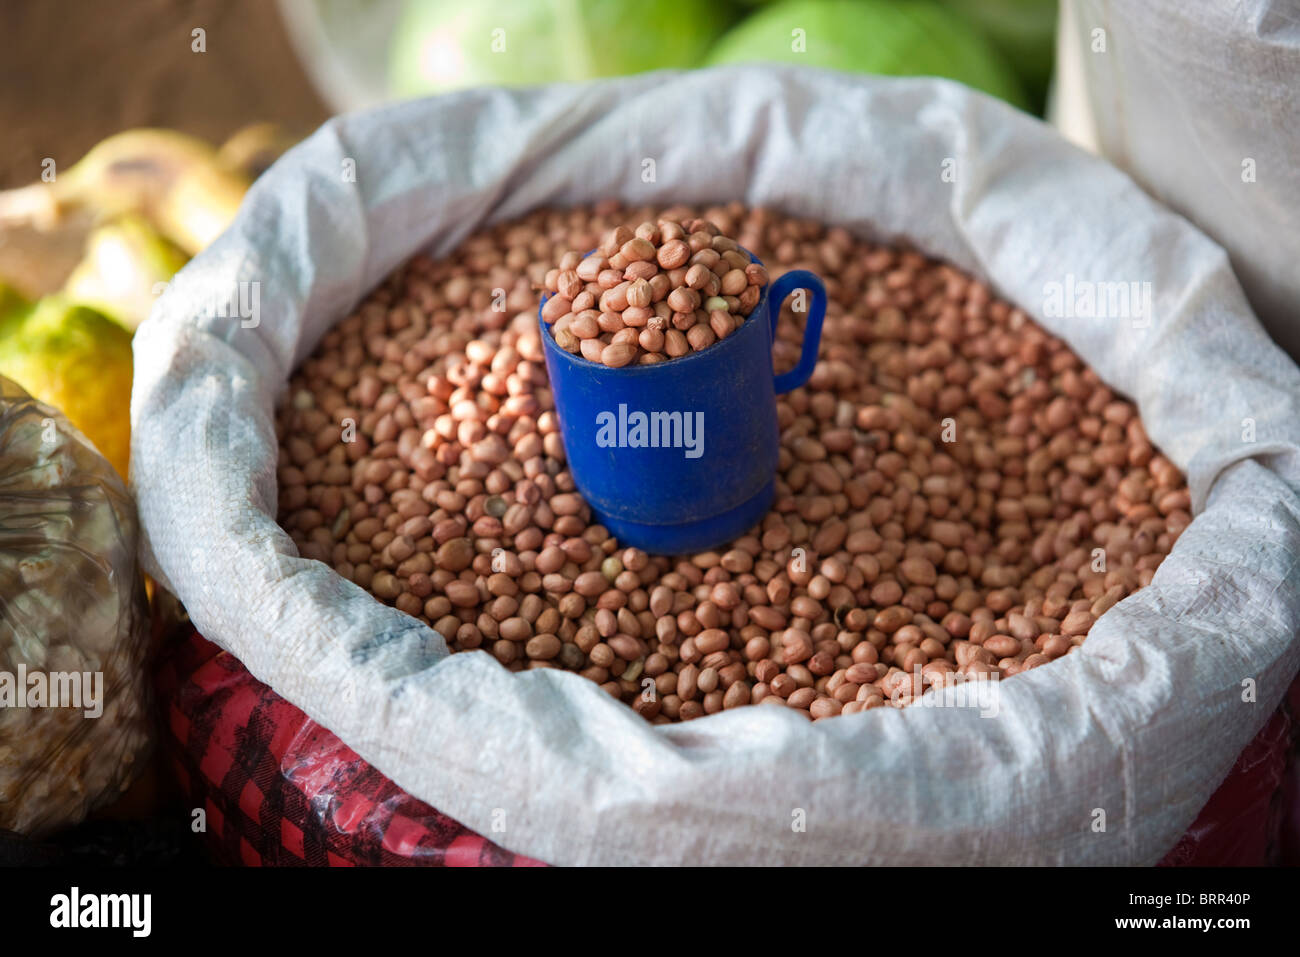 https://c8.alamy.com/comp/BRR40P/large-bag-of-peanuts-for-sale-by-the-cupful-at-a-market-in-inhambane-BRR40P.jpg